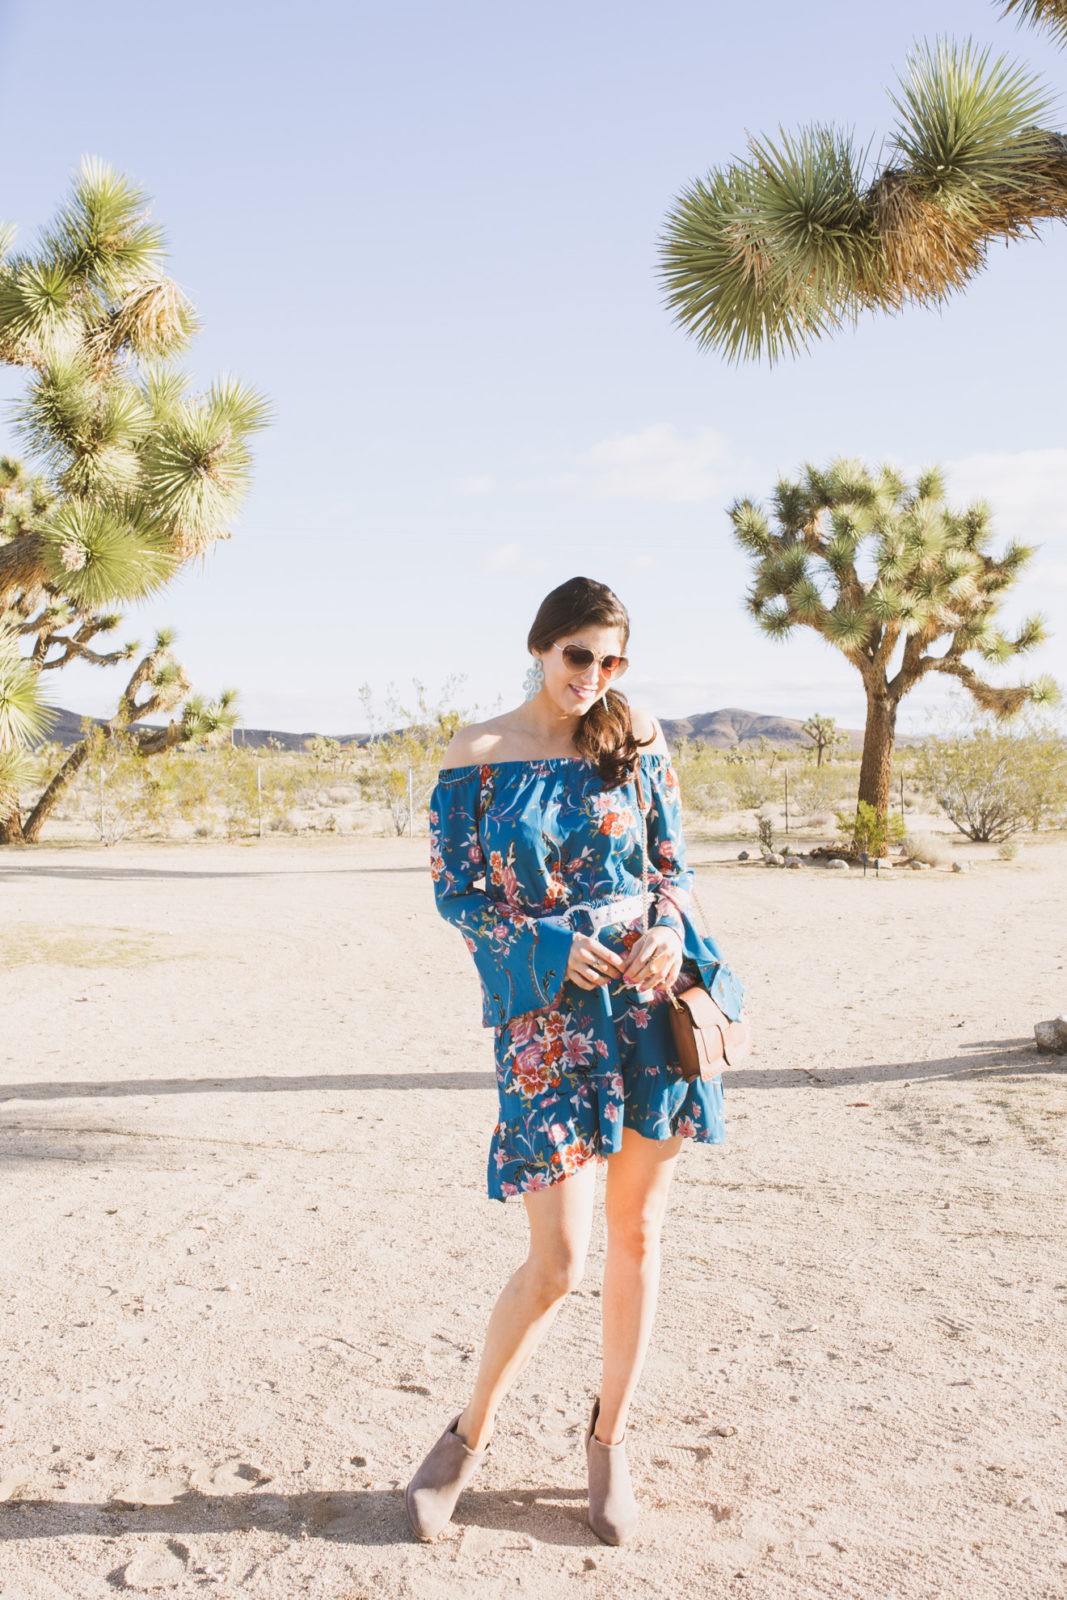 How to Find a Photographer by popular Los Angeles Fashion Blogger Laura Lily, 